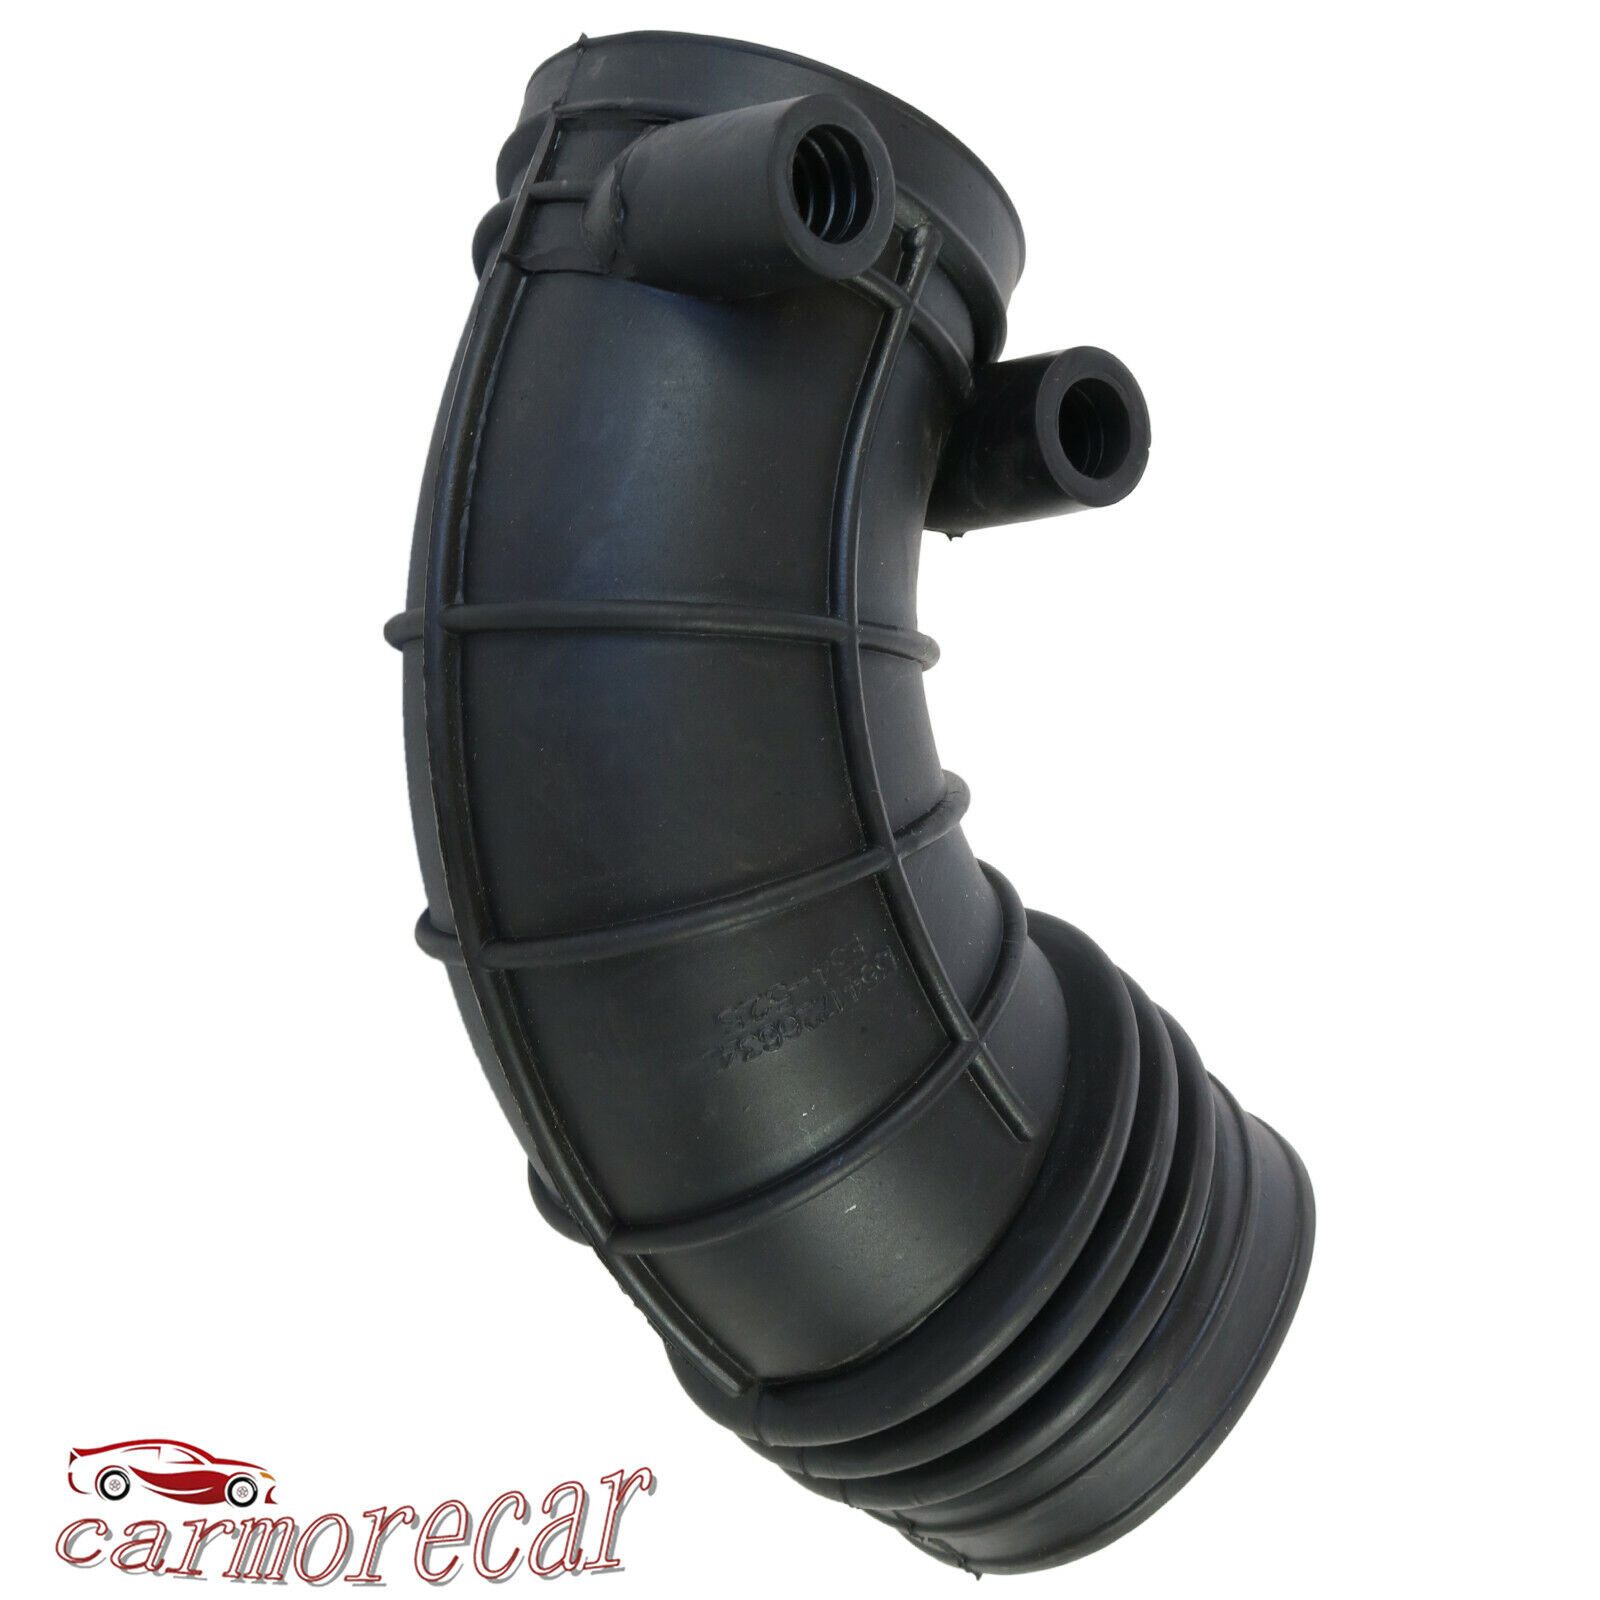 Engine Air Flow Meter Boot Intake Hose For 91-95 BMW 525i 525iT E34 M50 l6 2.5L